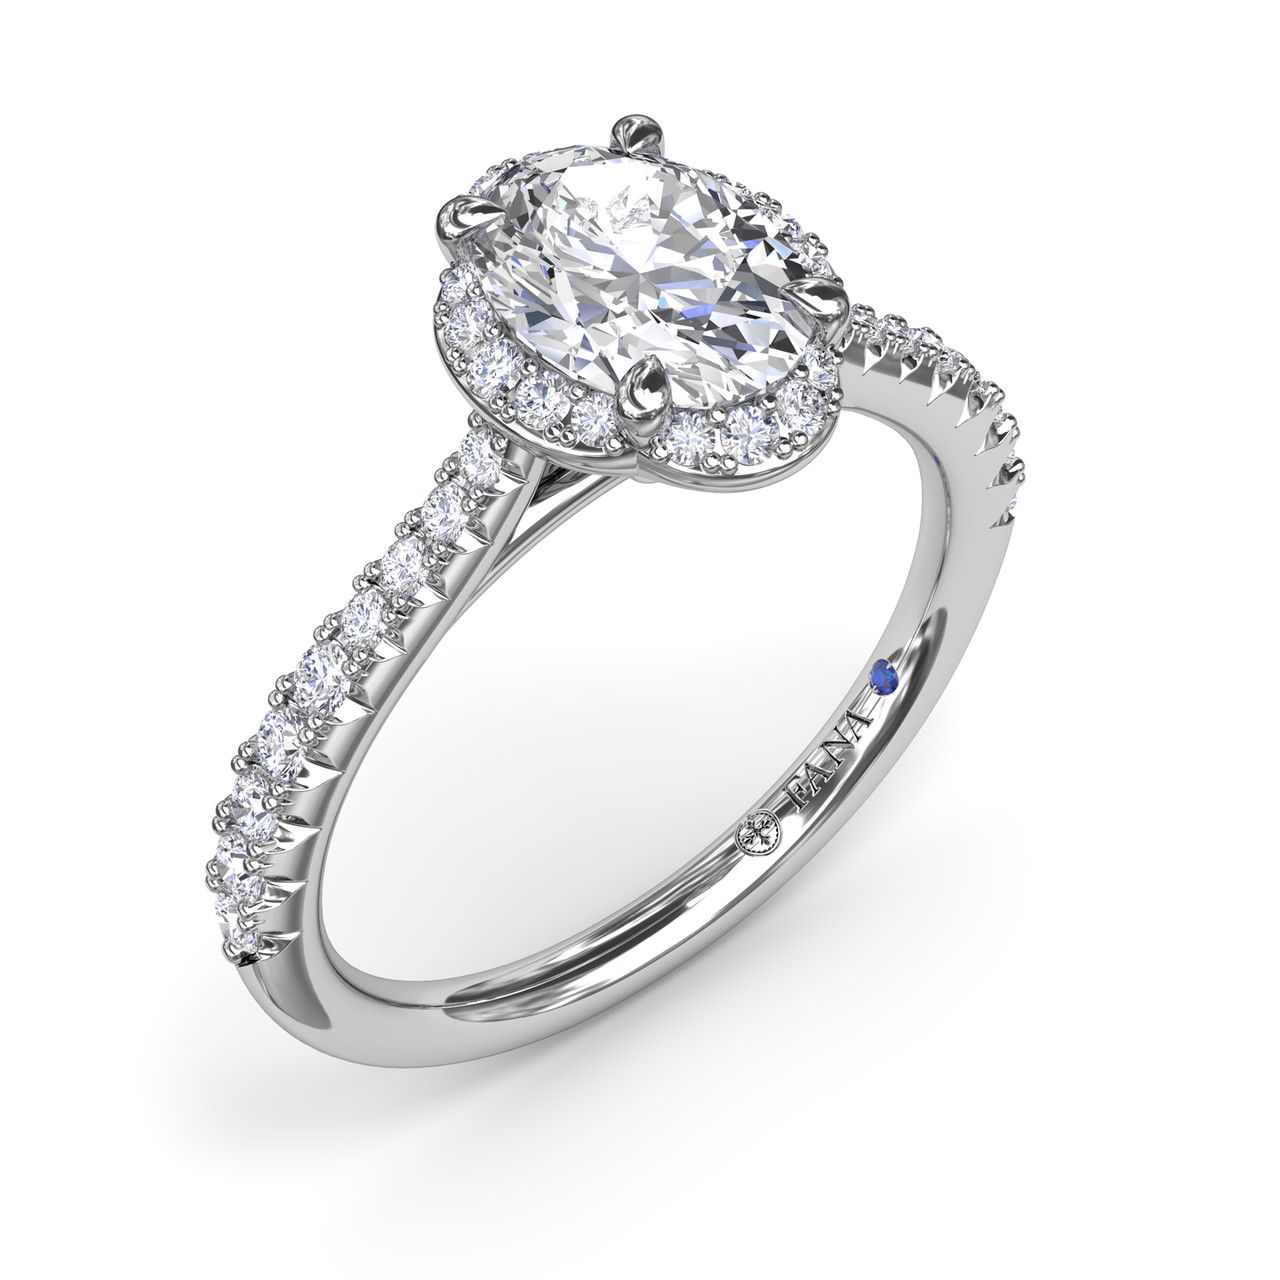 14K WHITE GOLD HALO SEMI-MOUNT RING SIZE 6.5 WITH 38=0.32TW ROUND G-H VS2-SI1 DIAMONDS AND ONE ROUND BLUE SAPPHIRE    (2.94 GRAMS)